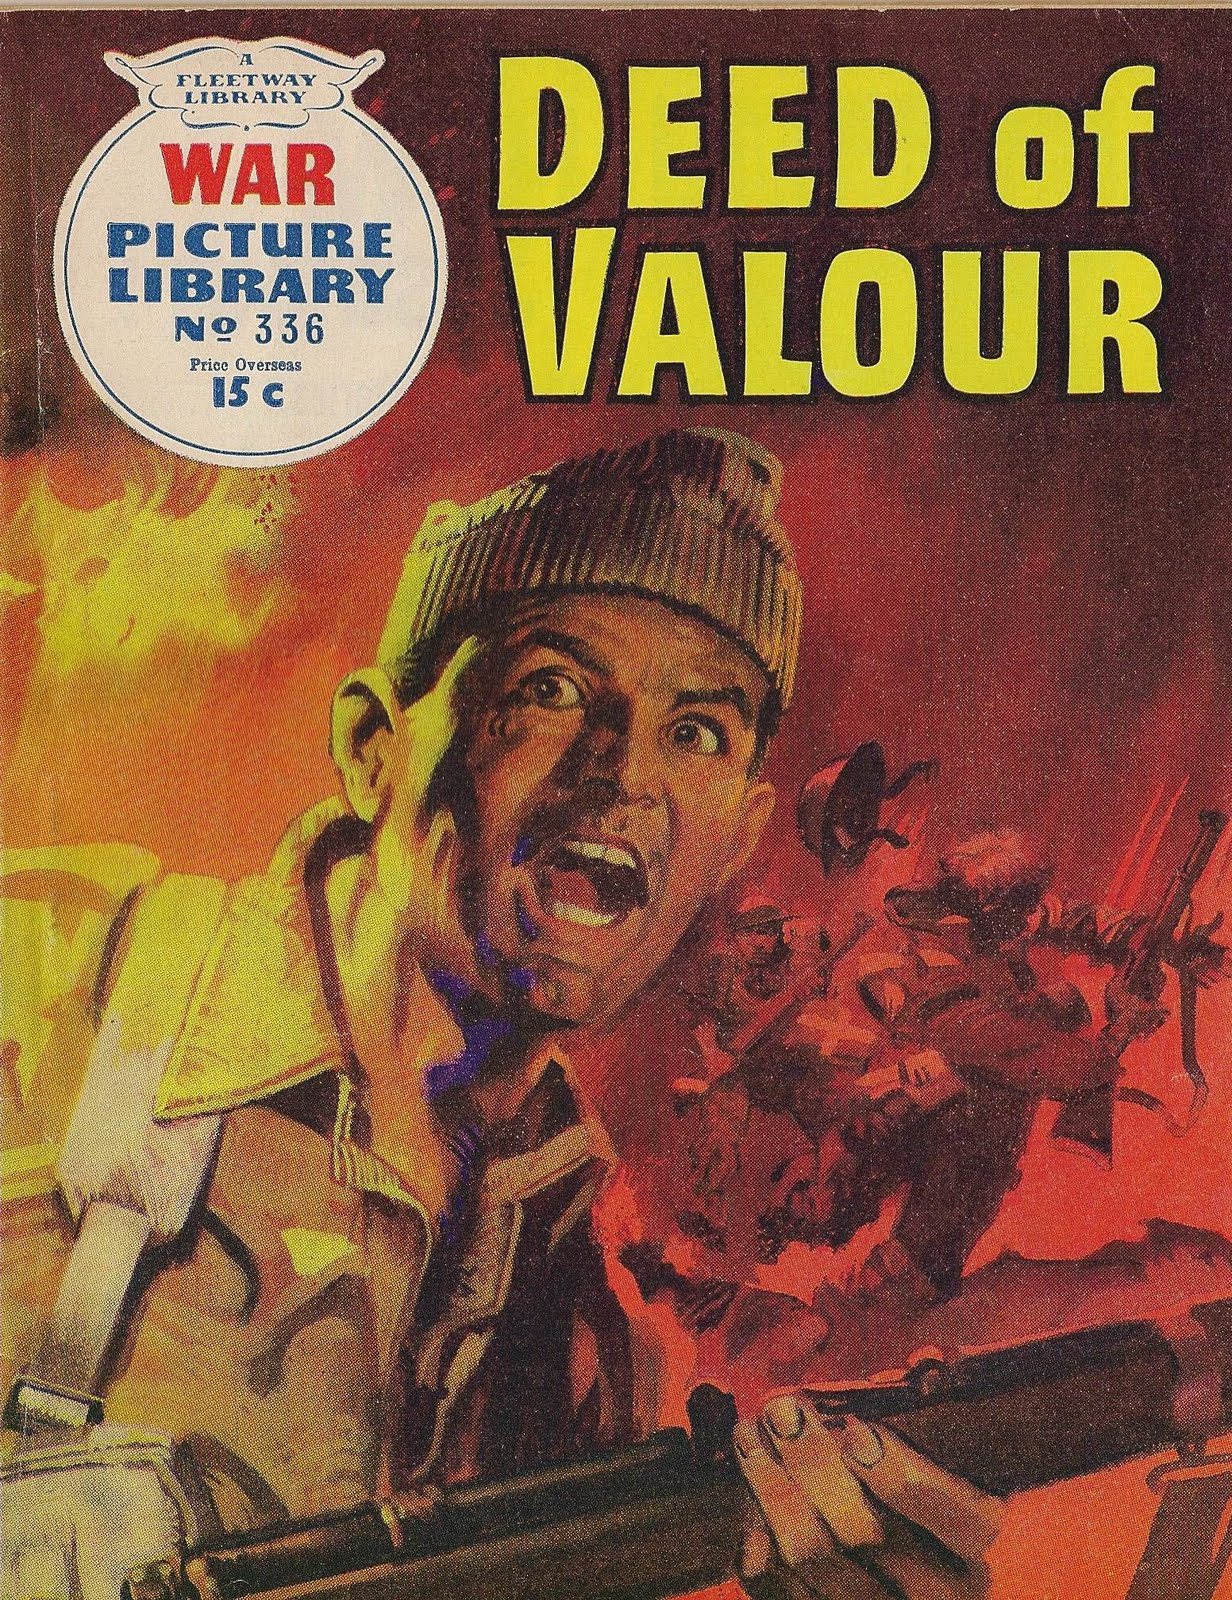 [Deed+of+Valour+cover.jpg]